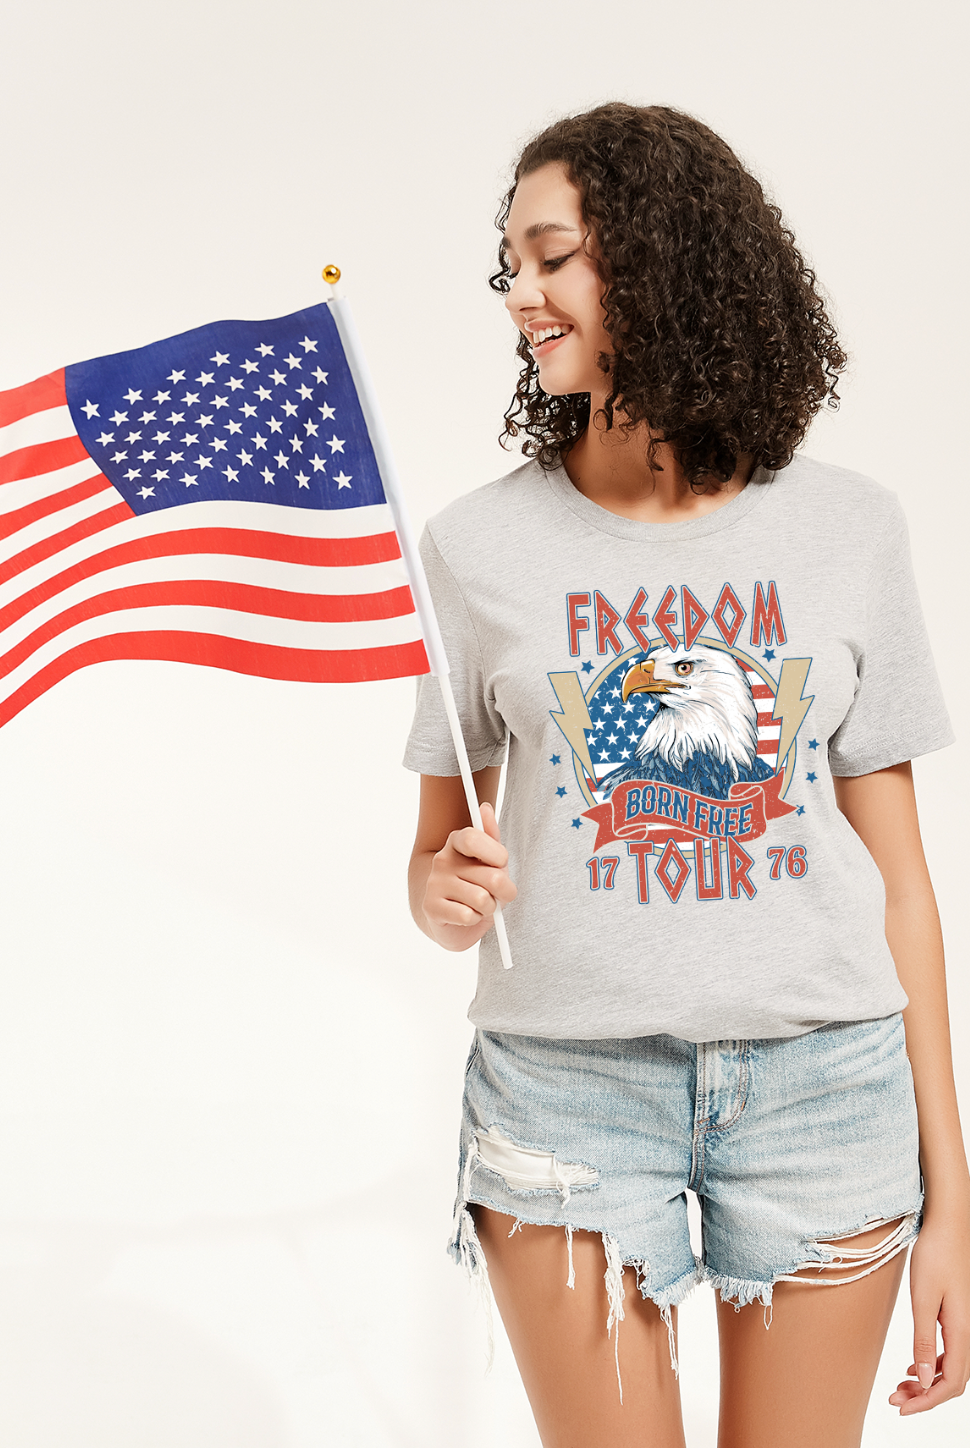 Freedom Tour. Born Free 1776. Vintage Americana 4th of Julysoft t-shirt from Bella and Canvas. Color shirt is light gray, athletic heather gray.